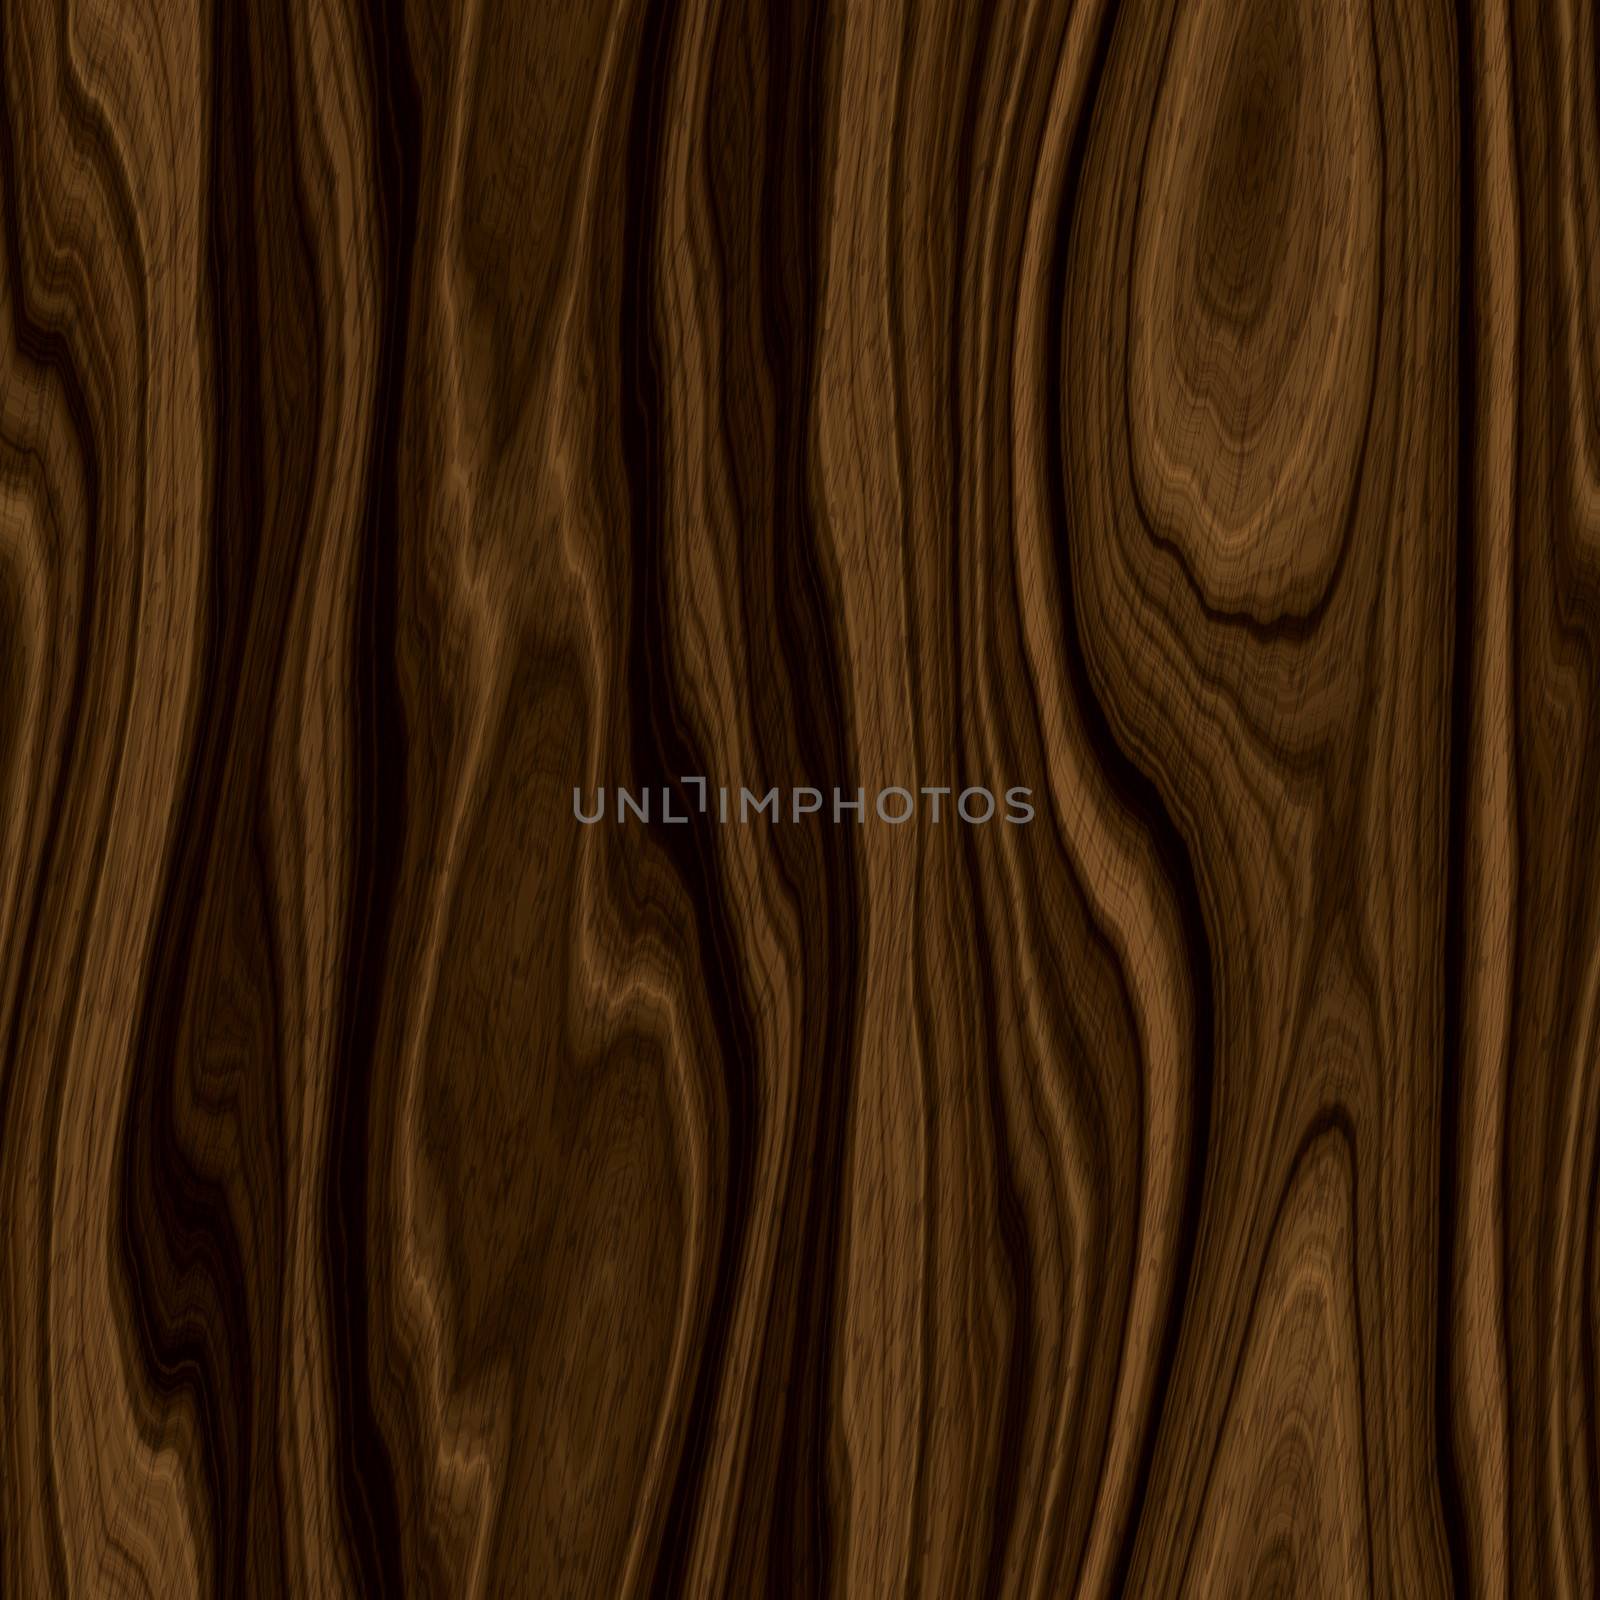 Seamless high quality wood texture background